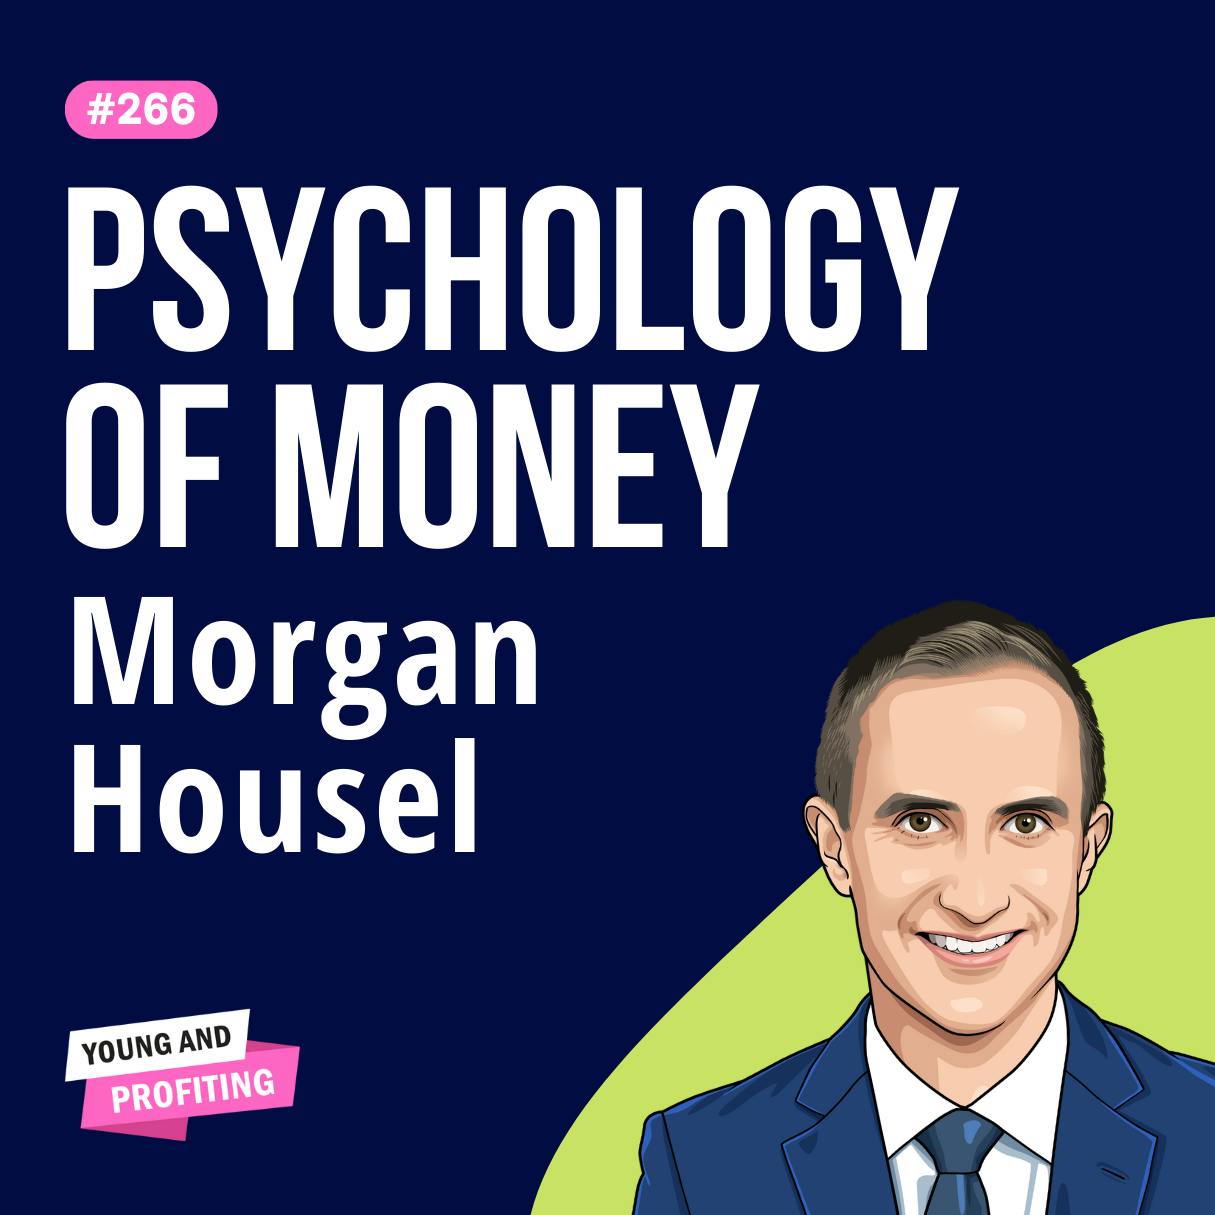 Morgan Housel: How to ACTUALLY Build Wealth, Investing to Gain Financial Independence | E266 by Hala Taha | YAP Media Network